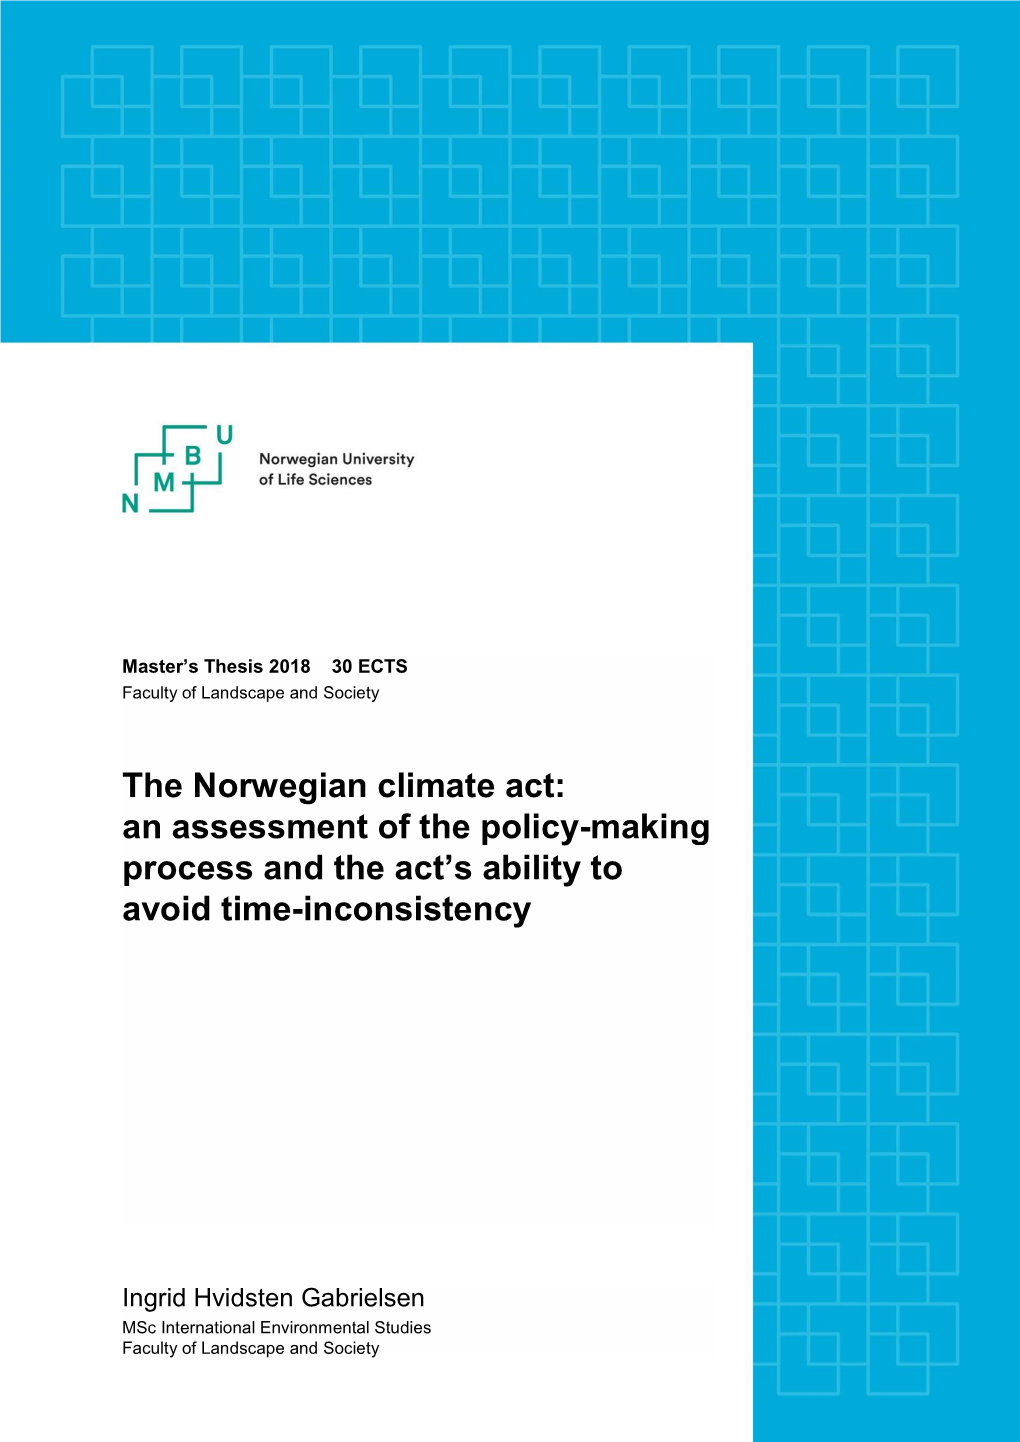 The Norwegian Climate Act: an Assessment of the Policy-Making Process and the Act’S Ability to Avoid Time-Inconsistency